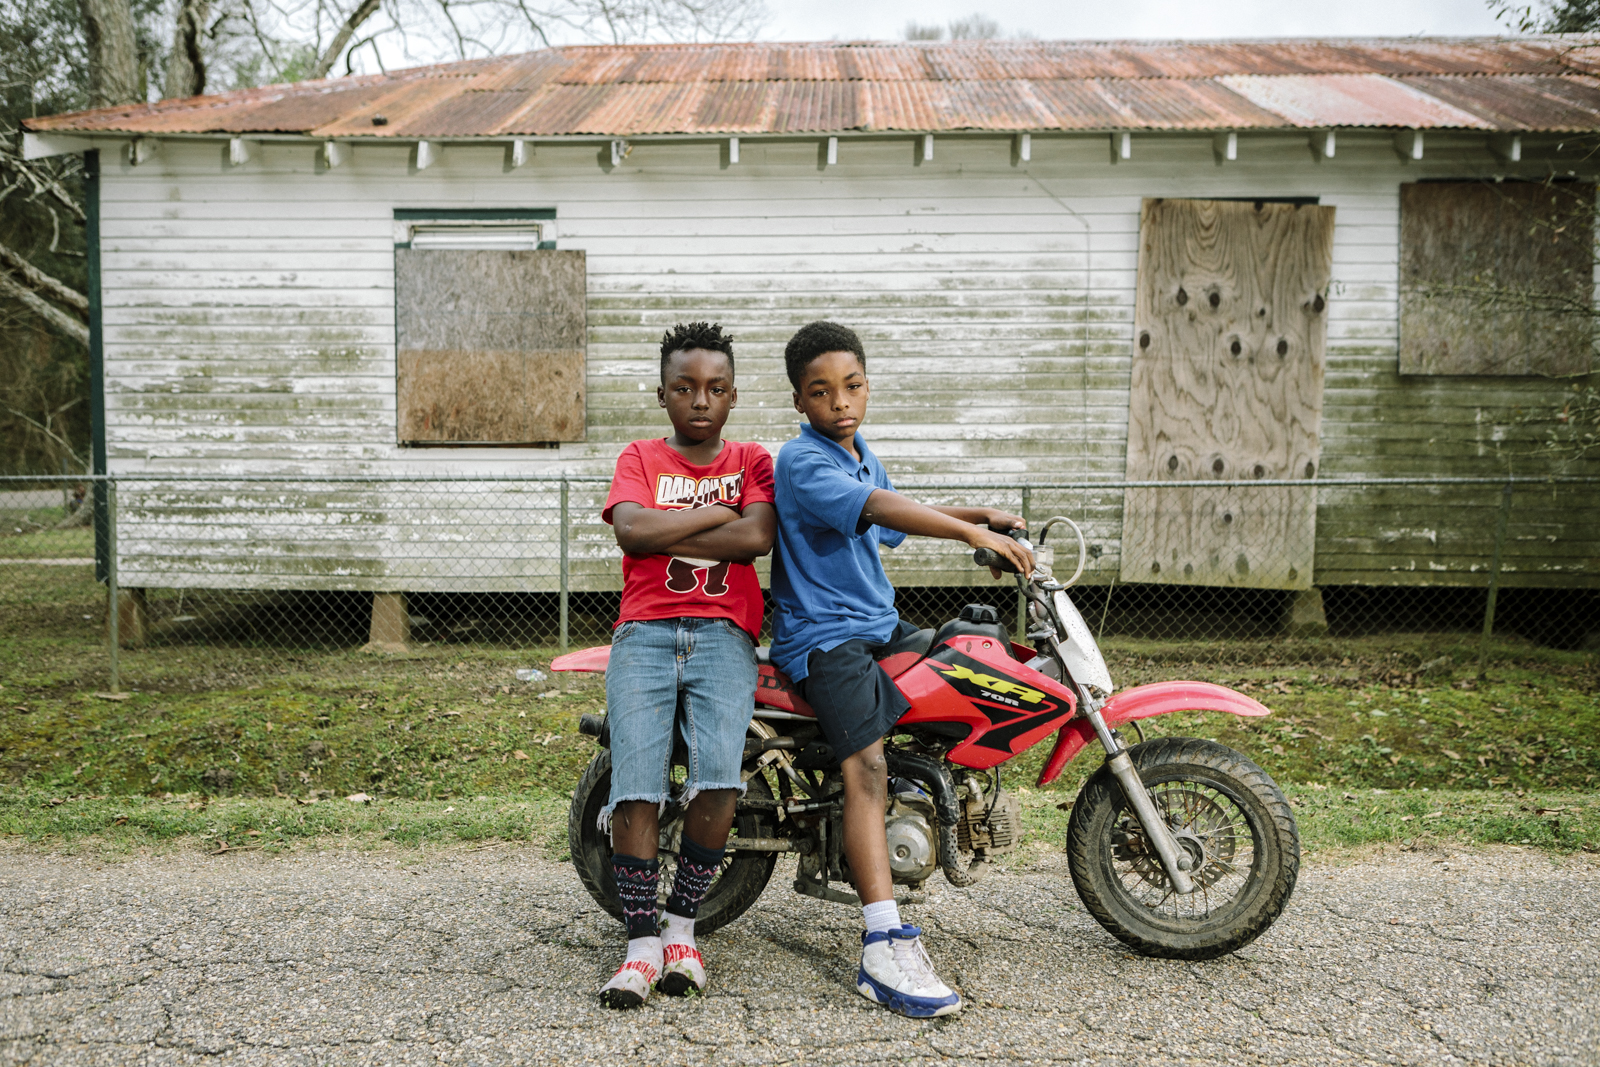  Reserve, LA - Feb 20, 2017 - Local residents Jaden James (9, L) and Lance Bovie (9) pause on Robinet Drive, less than a block from the fence line of the Dupont/Denka plant. Many of the homes in the area have been vacated as residents have either die